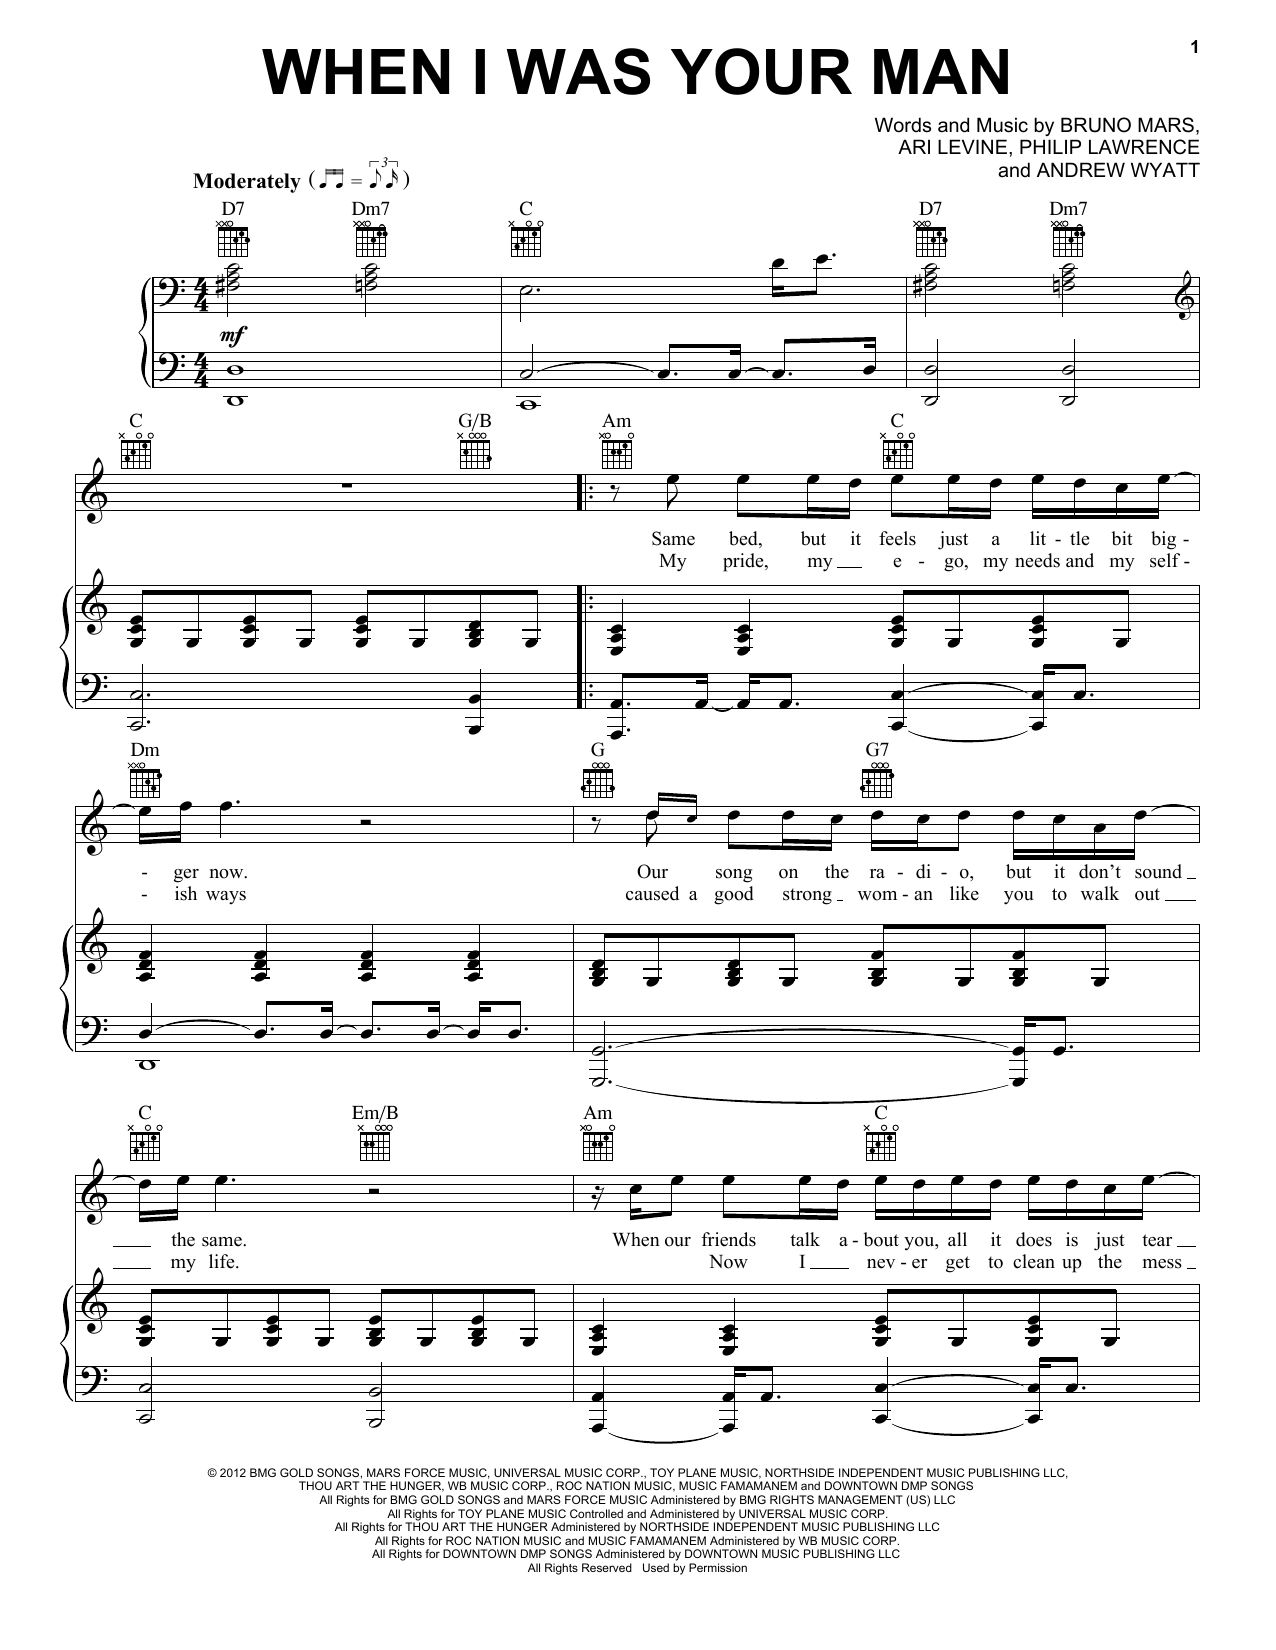 When I Was Your Man Chords Bruno Mars When I Was Your Man Sheet Music Notes Chords Download Printable Vpropg Sku 405266